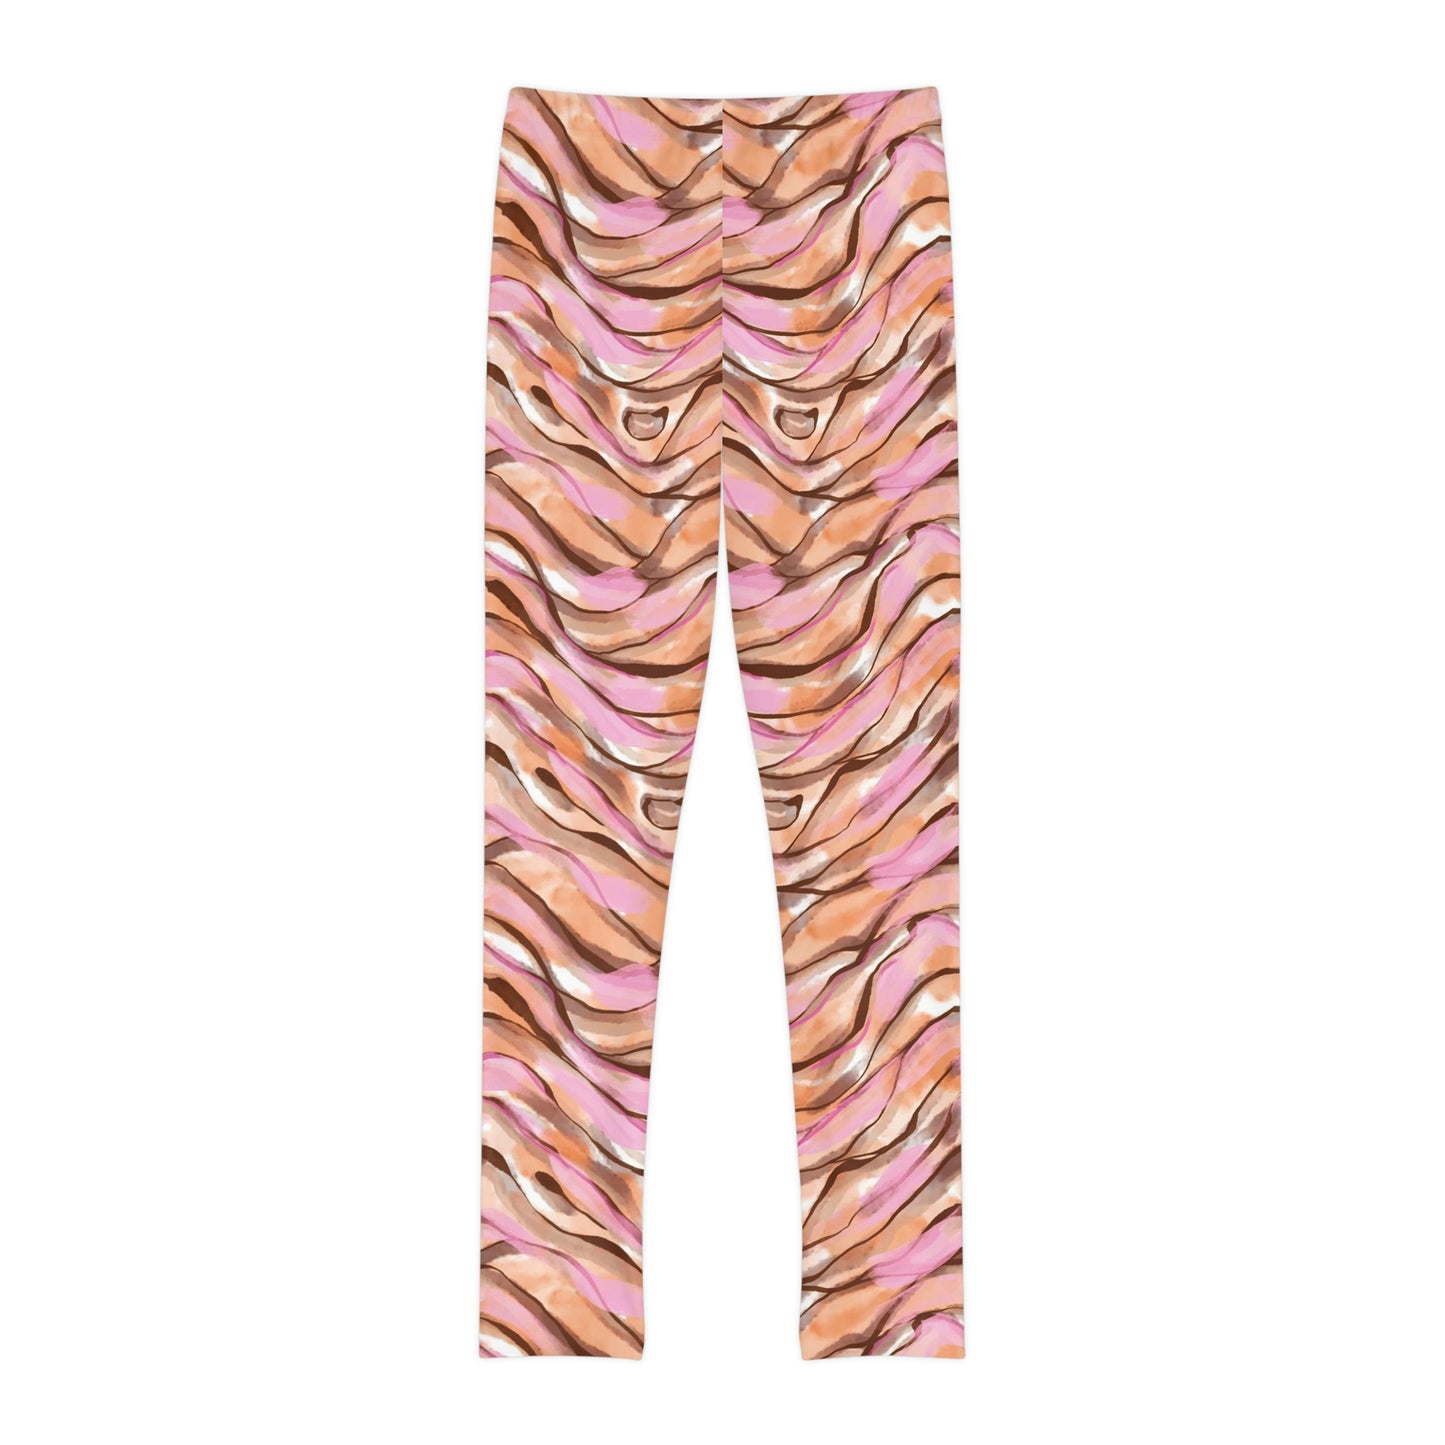 Tiger Youth Leggings,  One of a Kind Gift - Unique Workout Activewear tights for  kids Fitness , Daughter, Niece  Christmas Gift